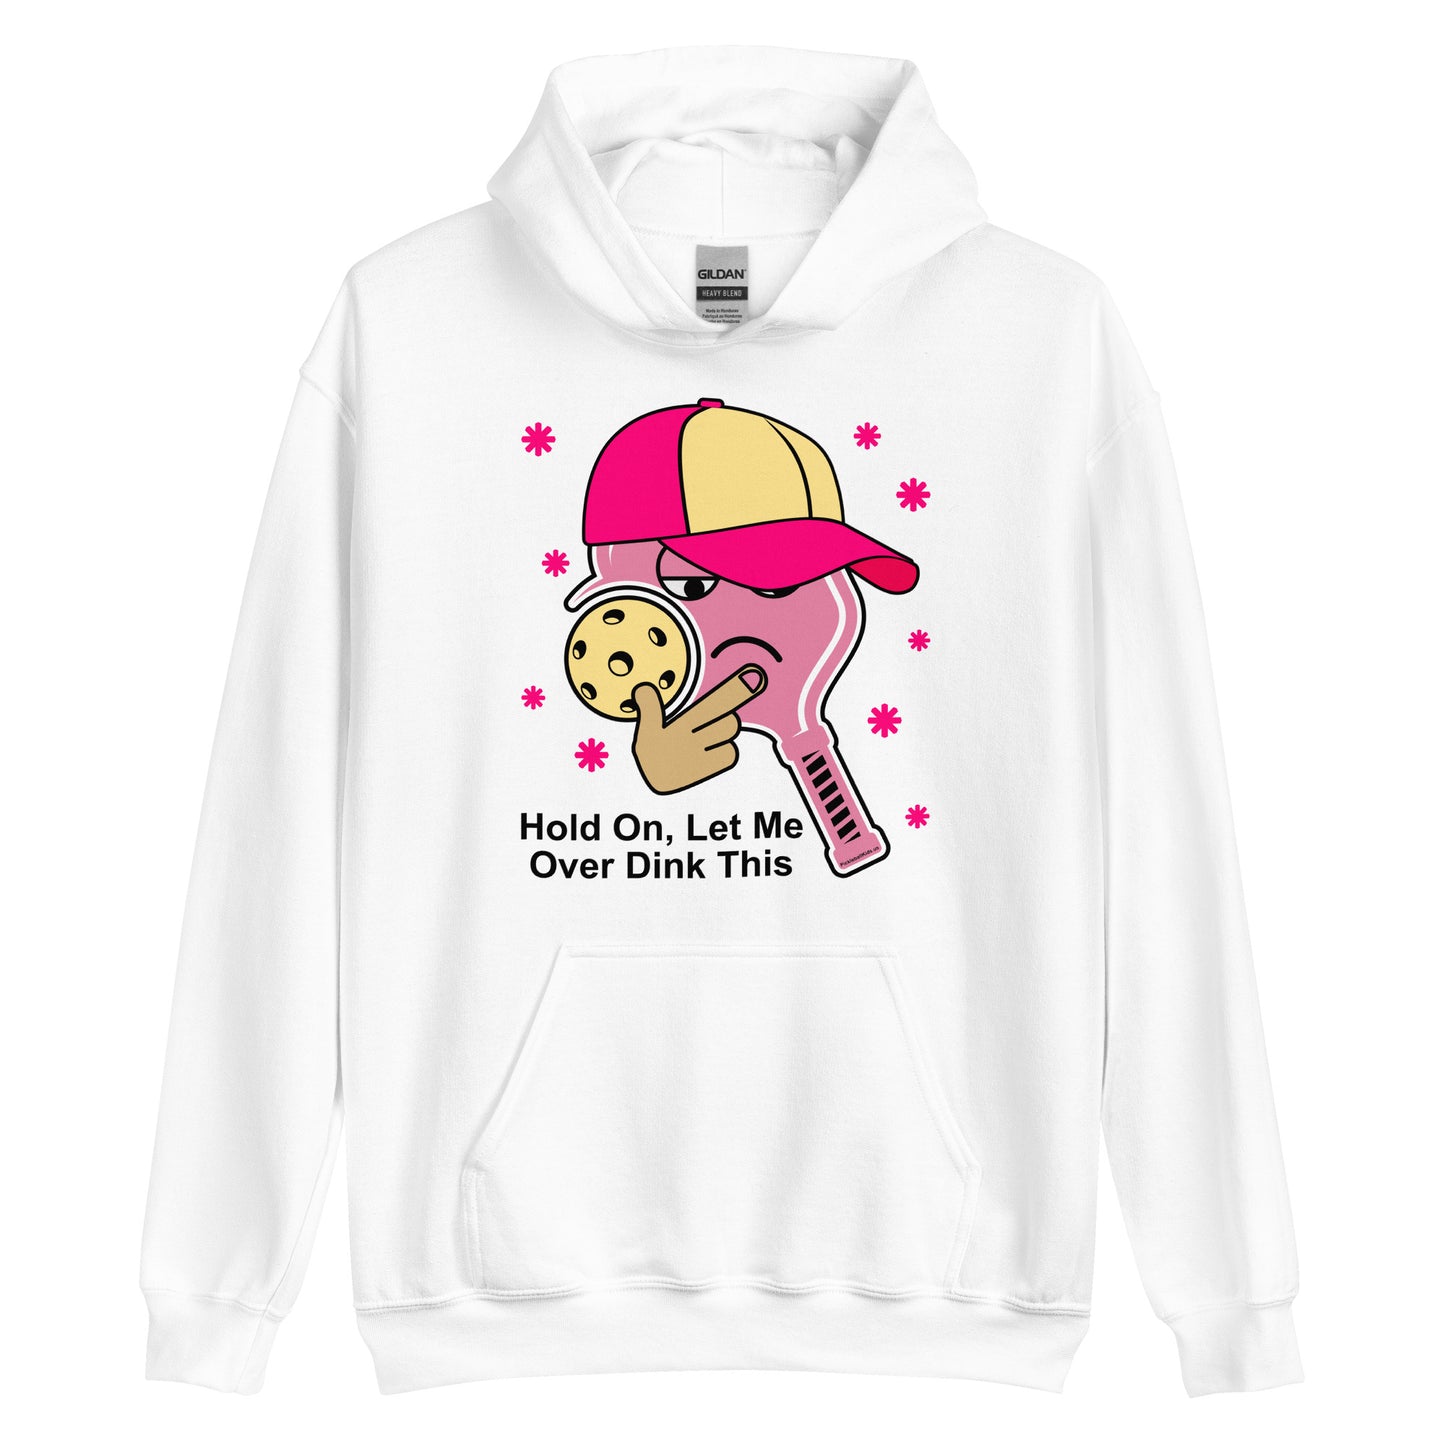 Fun Pickleball Unisex Hoodie, "Hold On, Let Me Over Dink This" Thinking Pun